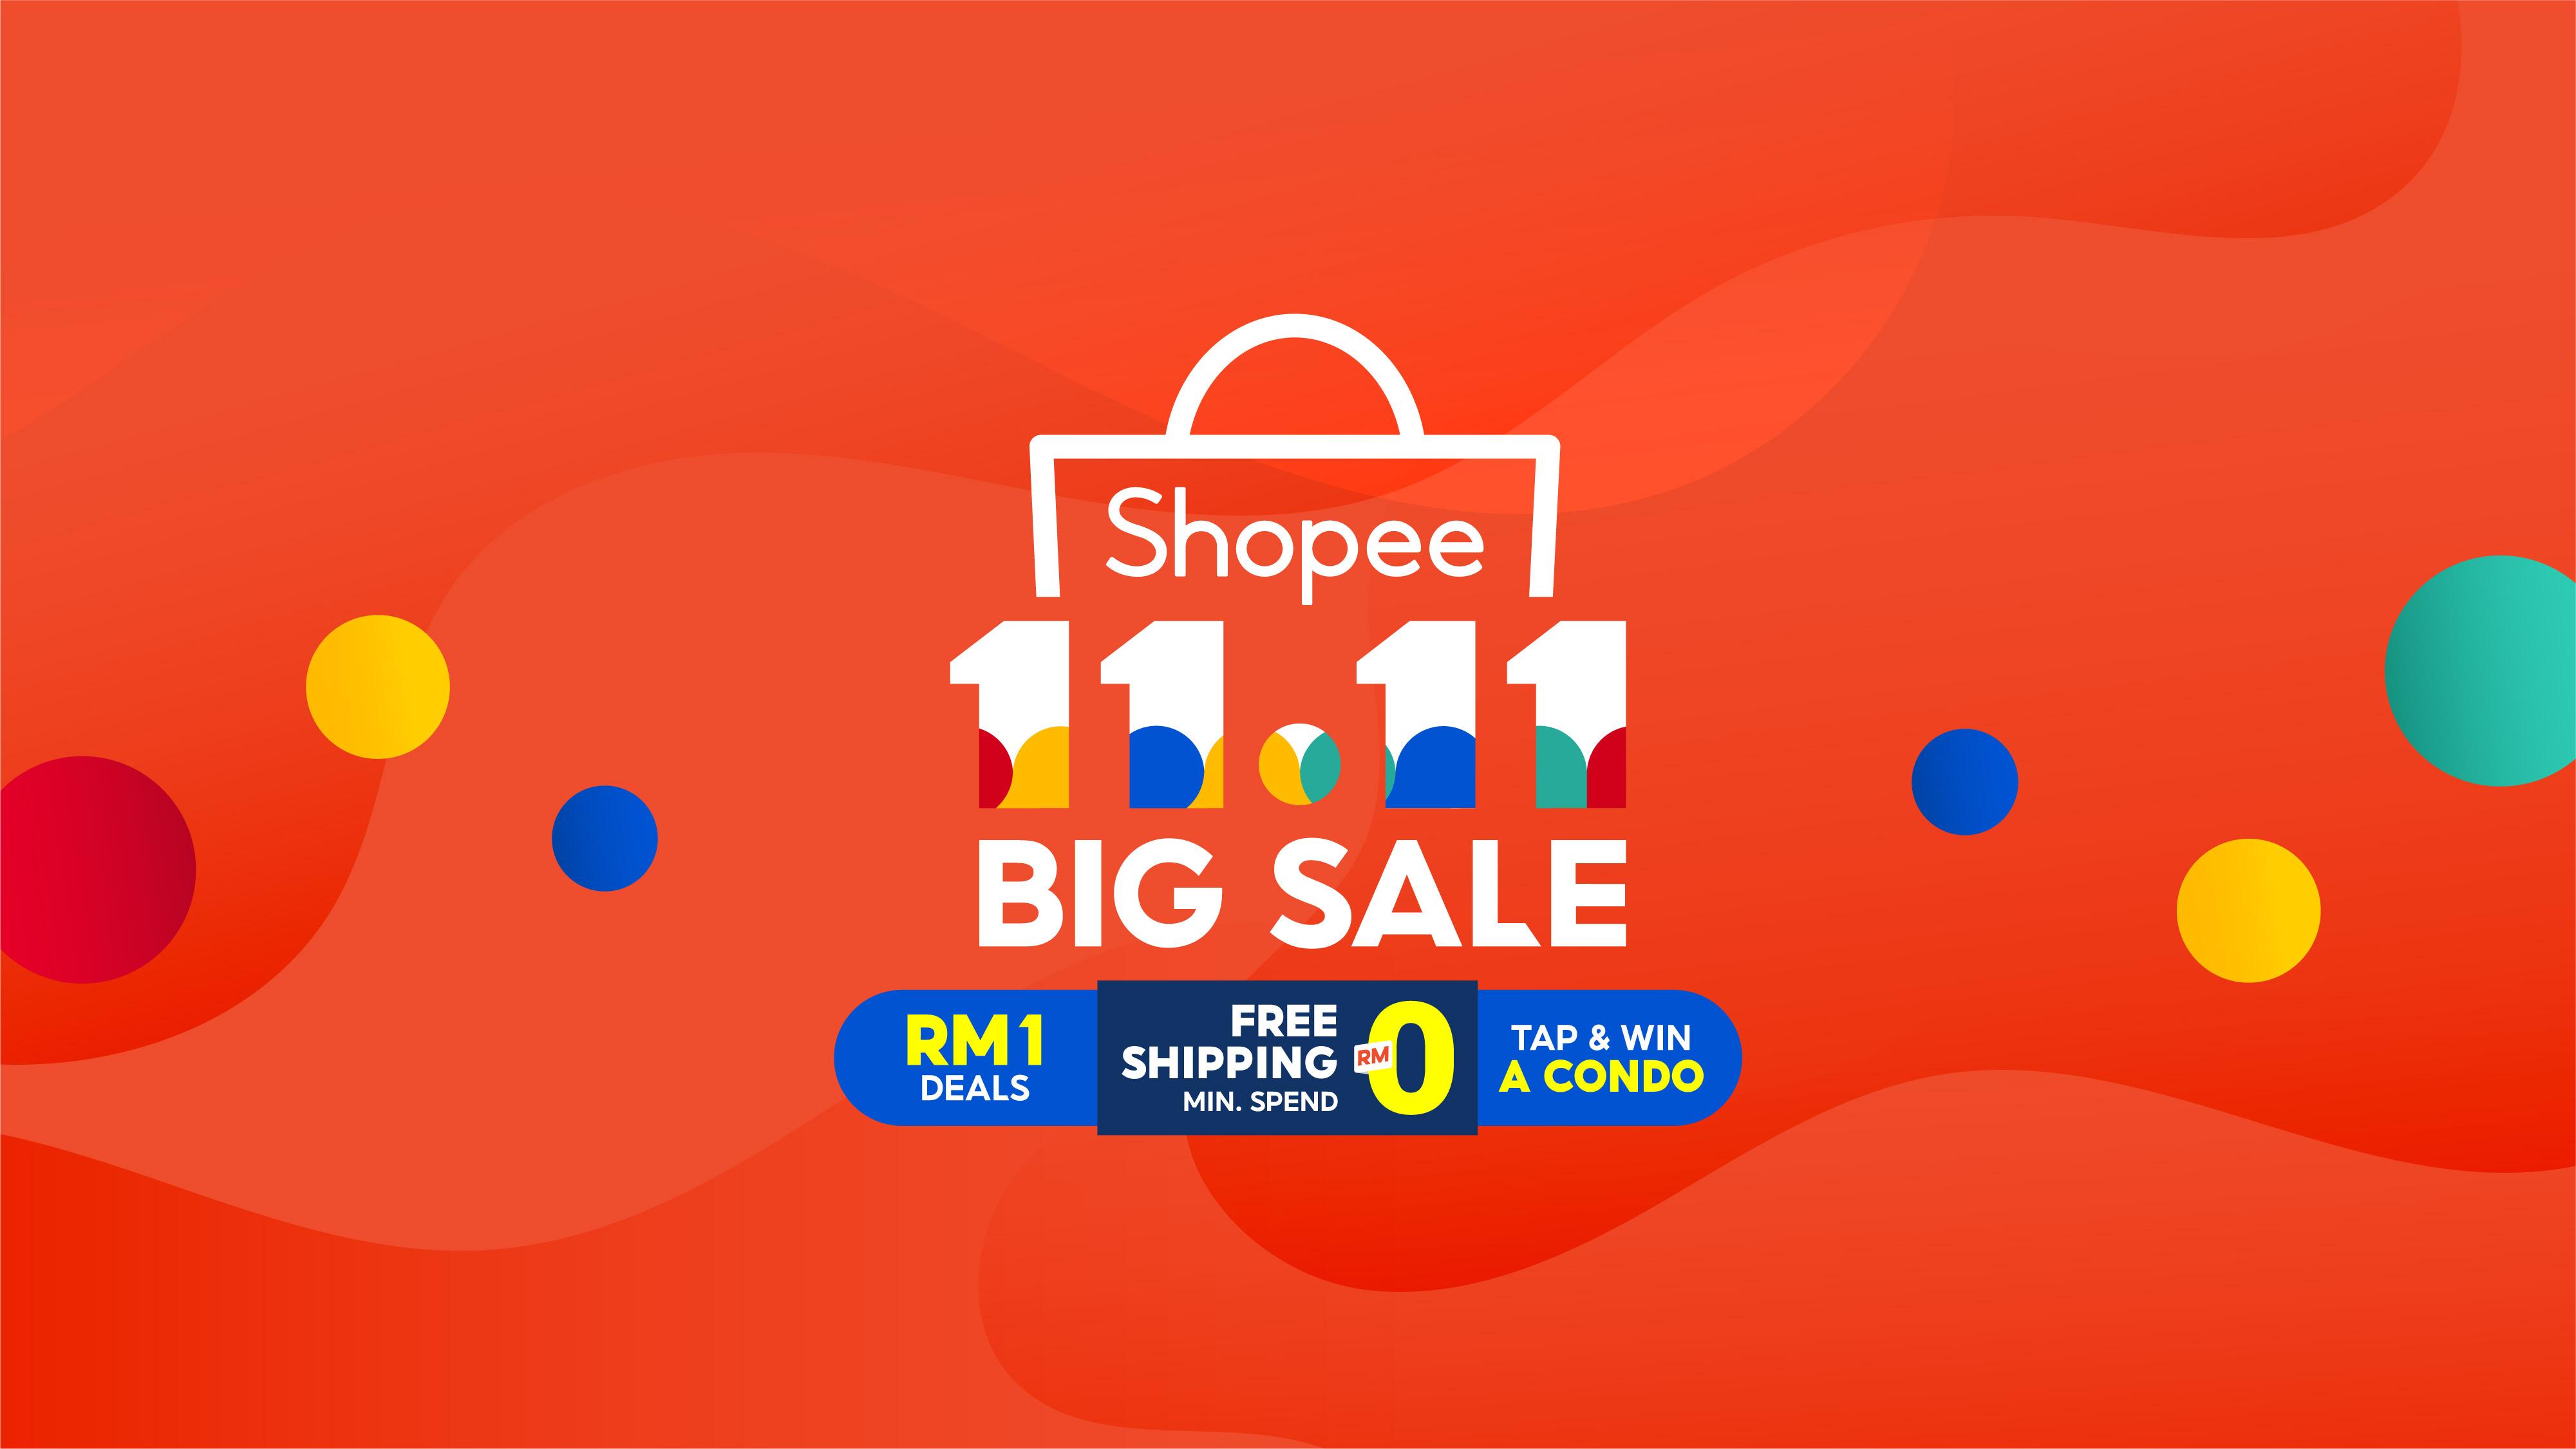 Shopee 11 11 Big Sale Returns Set To Connect More Malaysians And Businesses